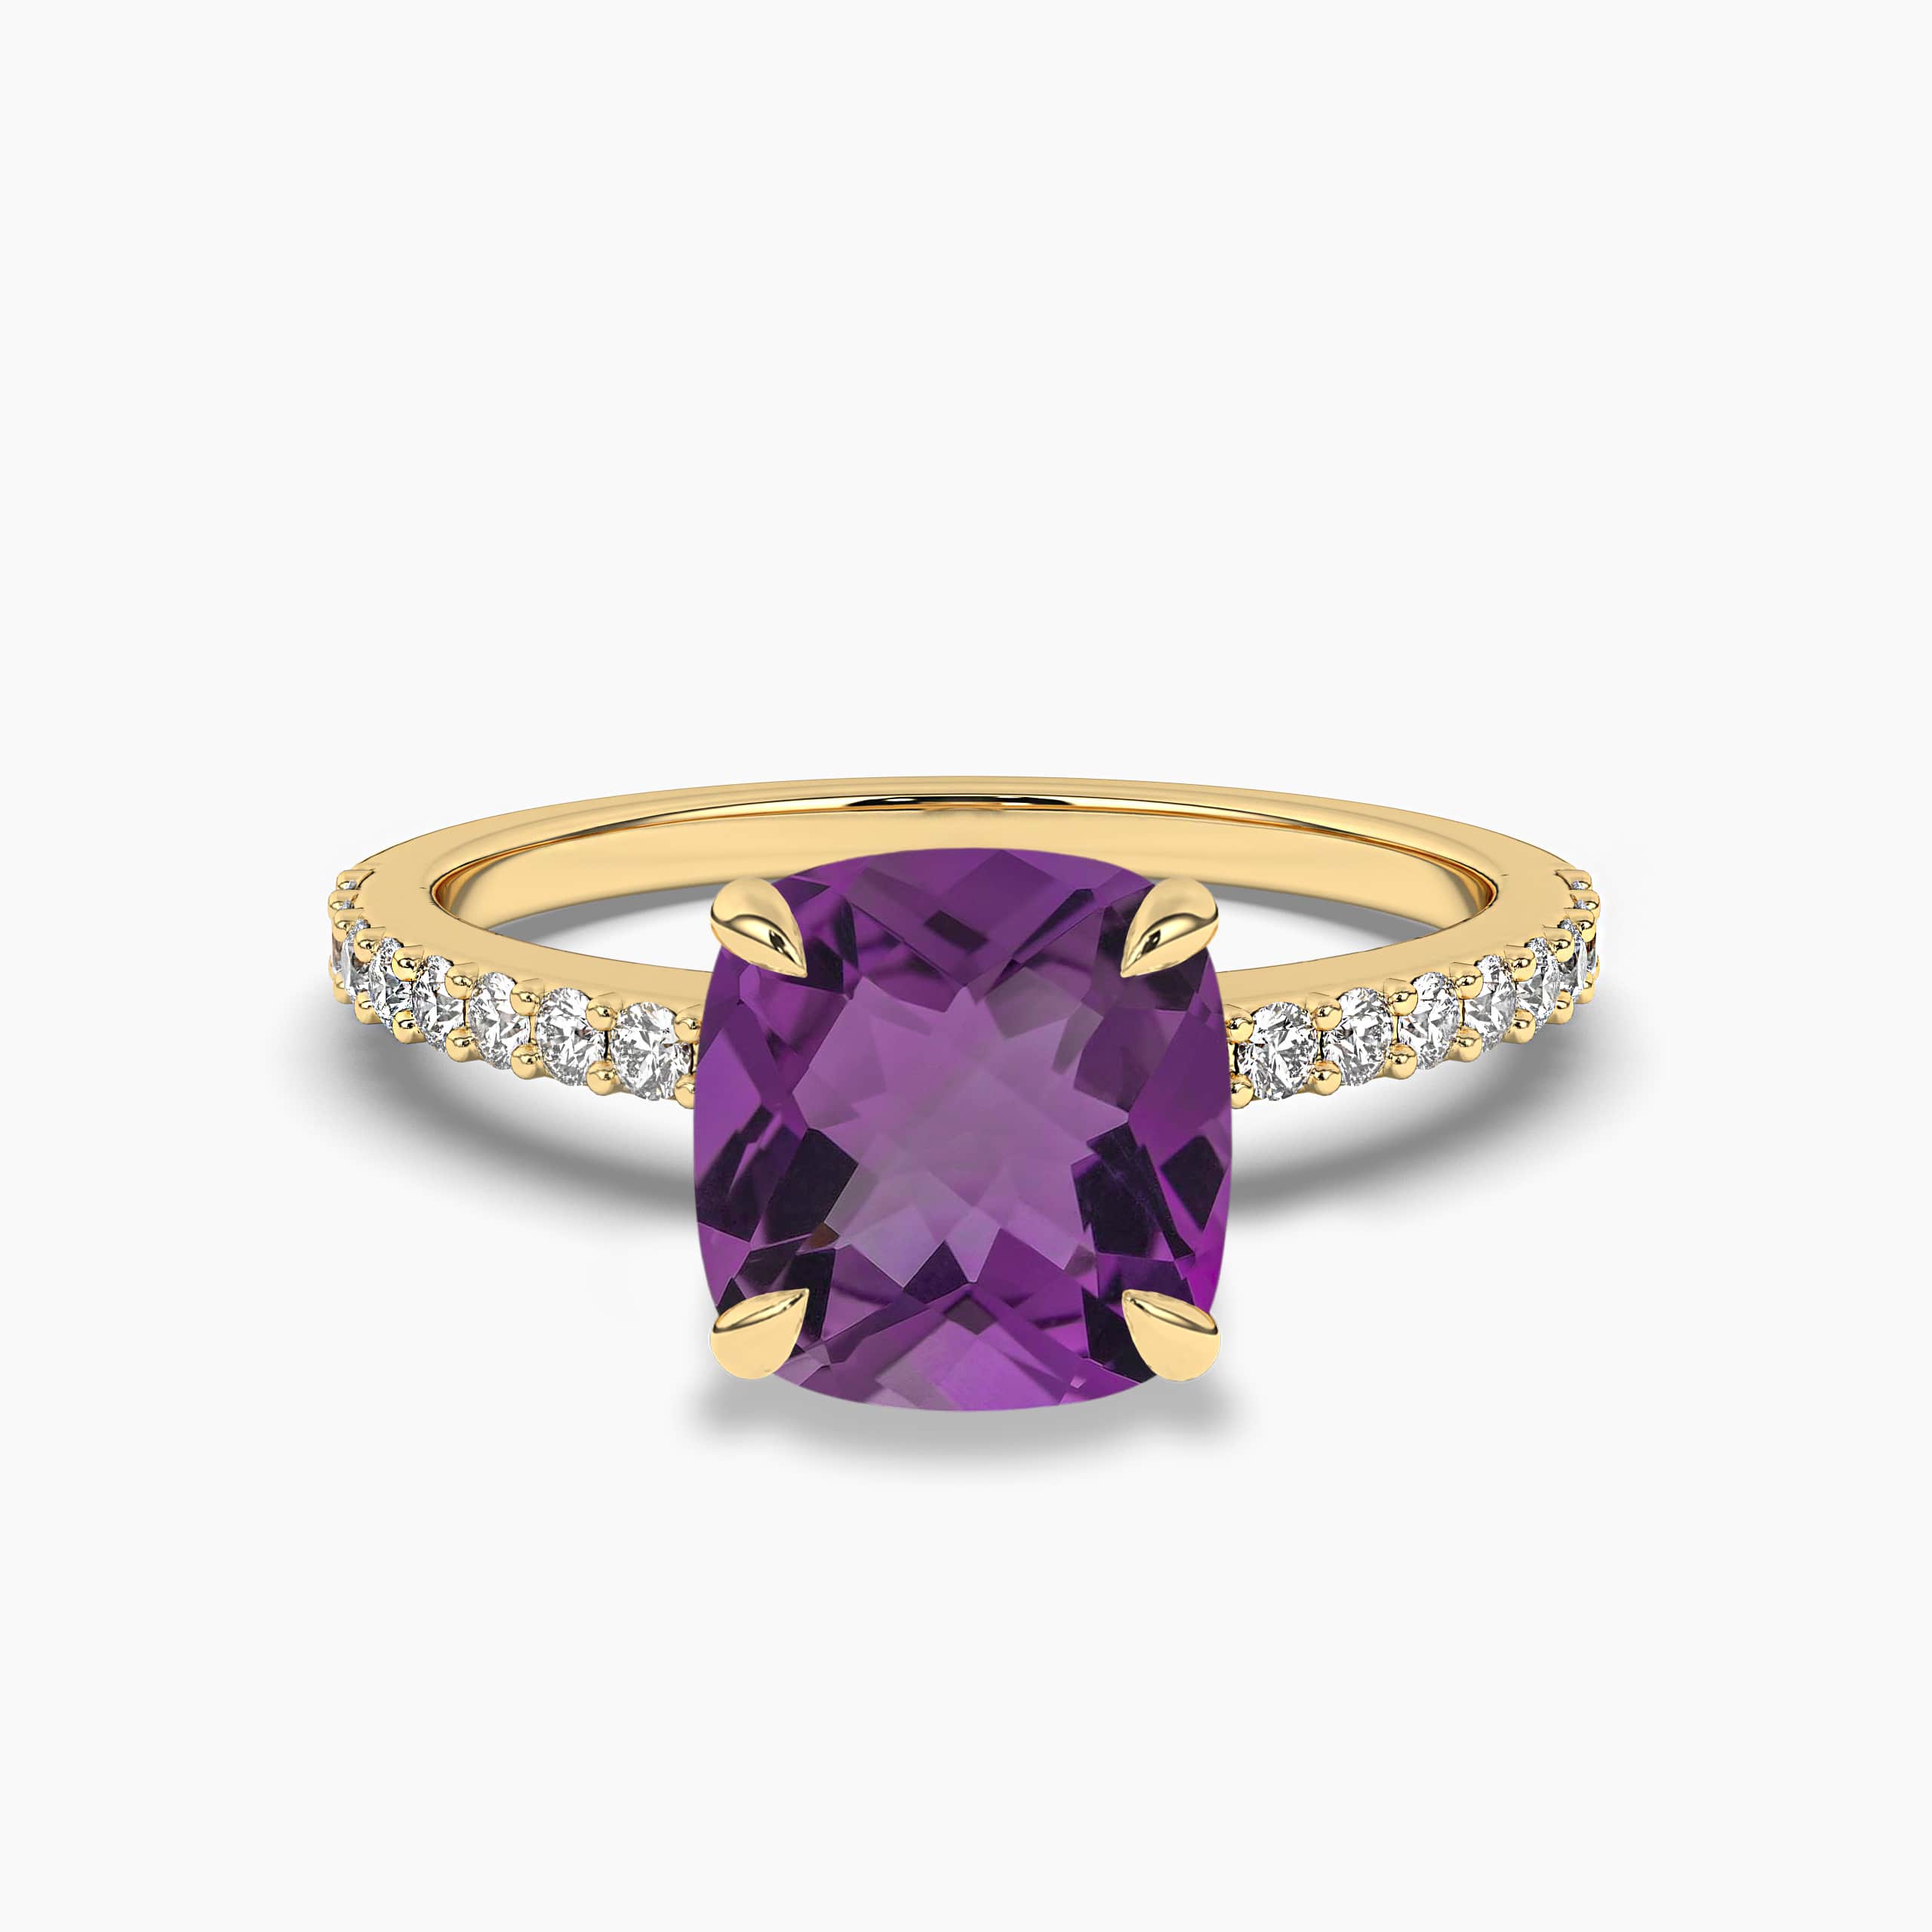 Amethyst and Diamond Ring in yellow gold